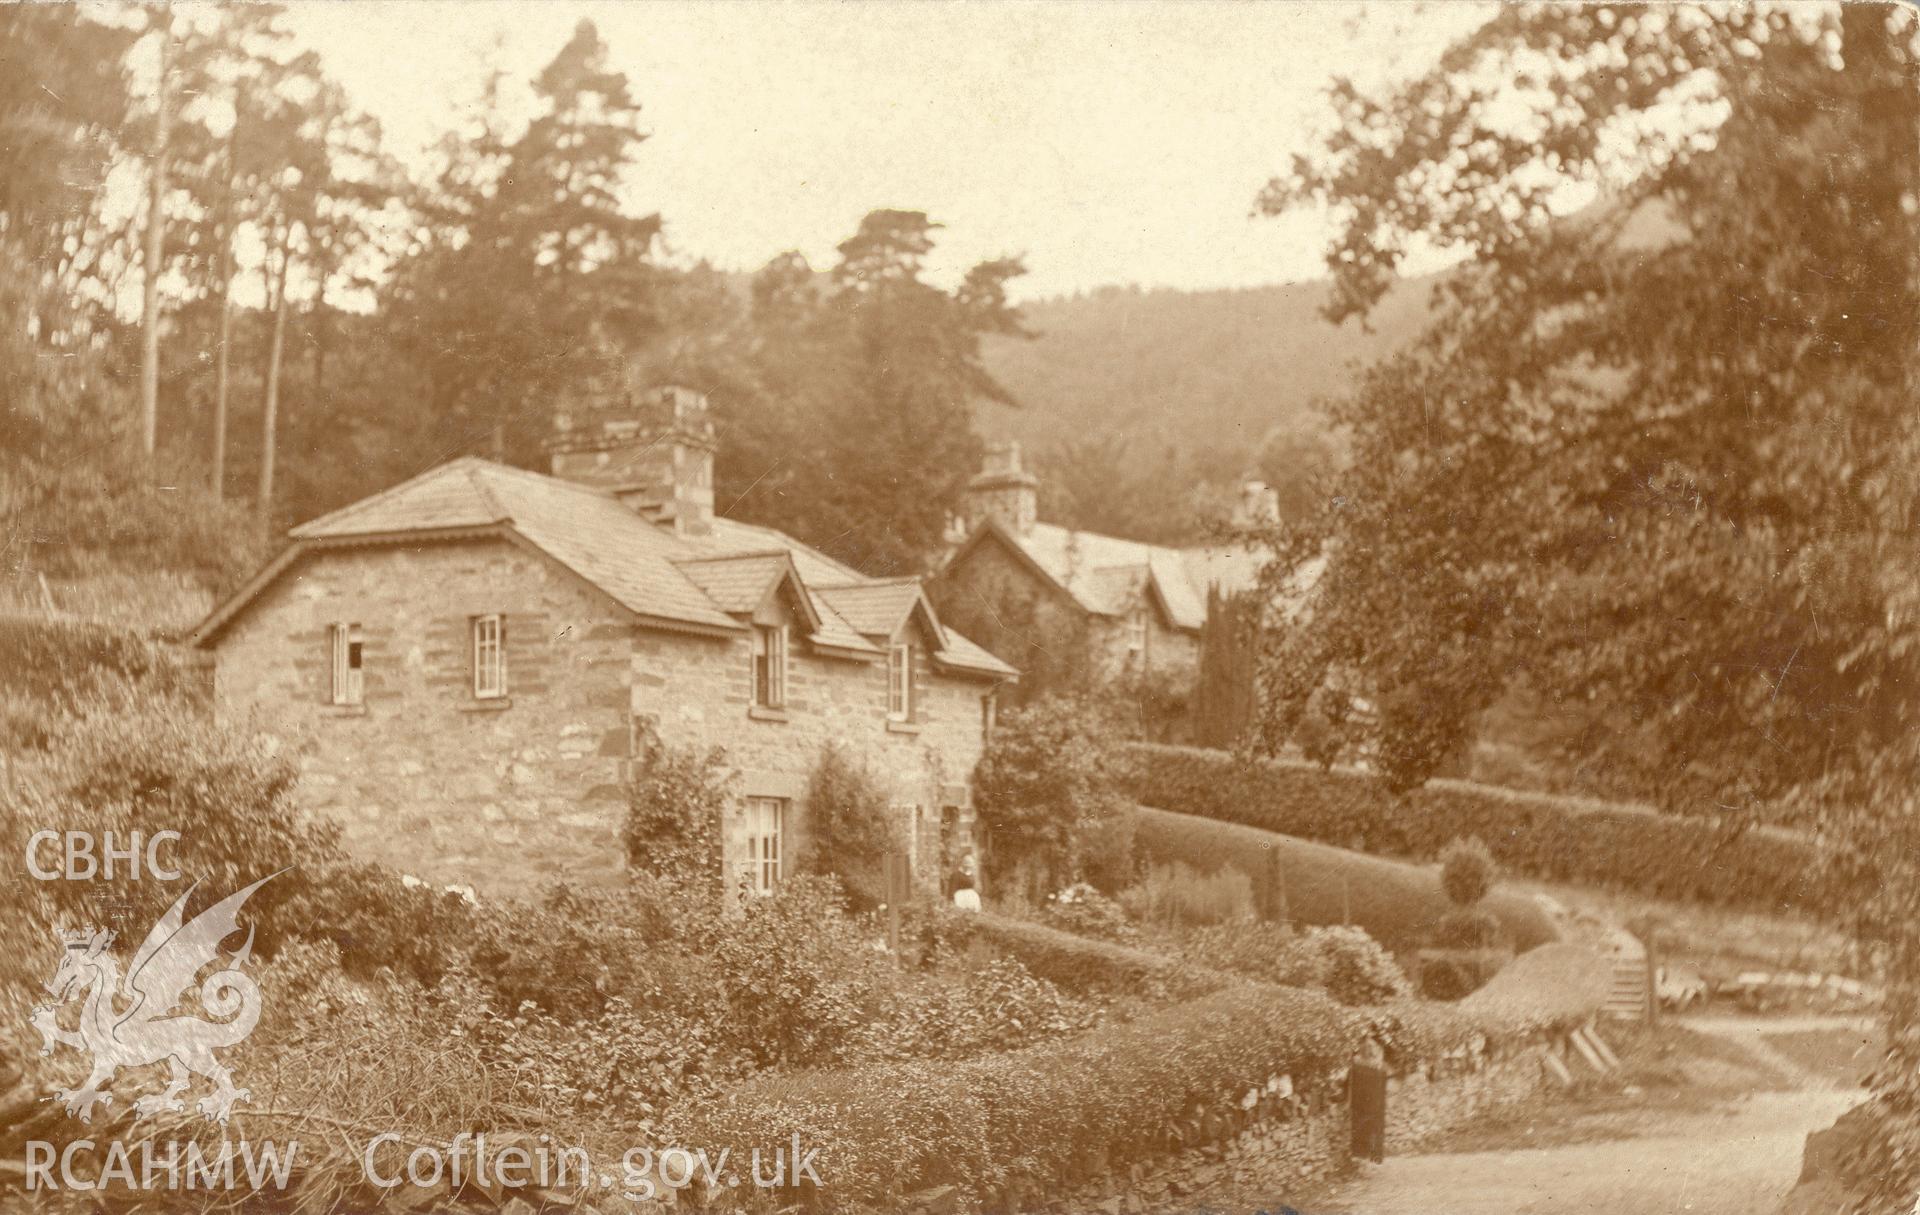 Digitised postcard image of unidentified cottages, Betws-y-coed. Produced by Parks and Gardens Data Services, from an original item in the Peter Davis Collection at Parks and Gardens UK. We hold only web-resolution images of this collection, suitable for viewing on screen and for research purposes only. We do not hold the original images, or publication quality scans.